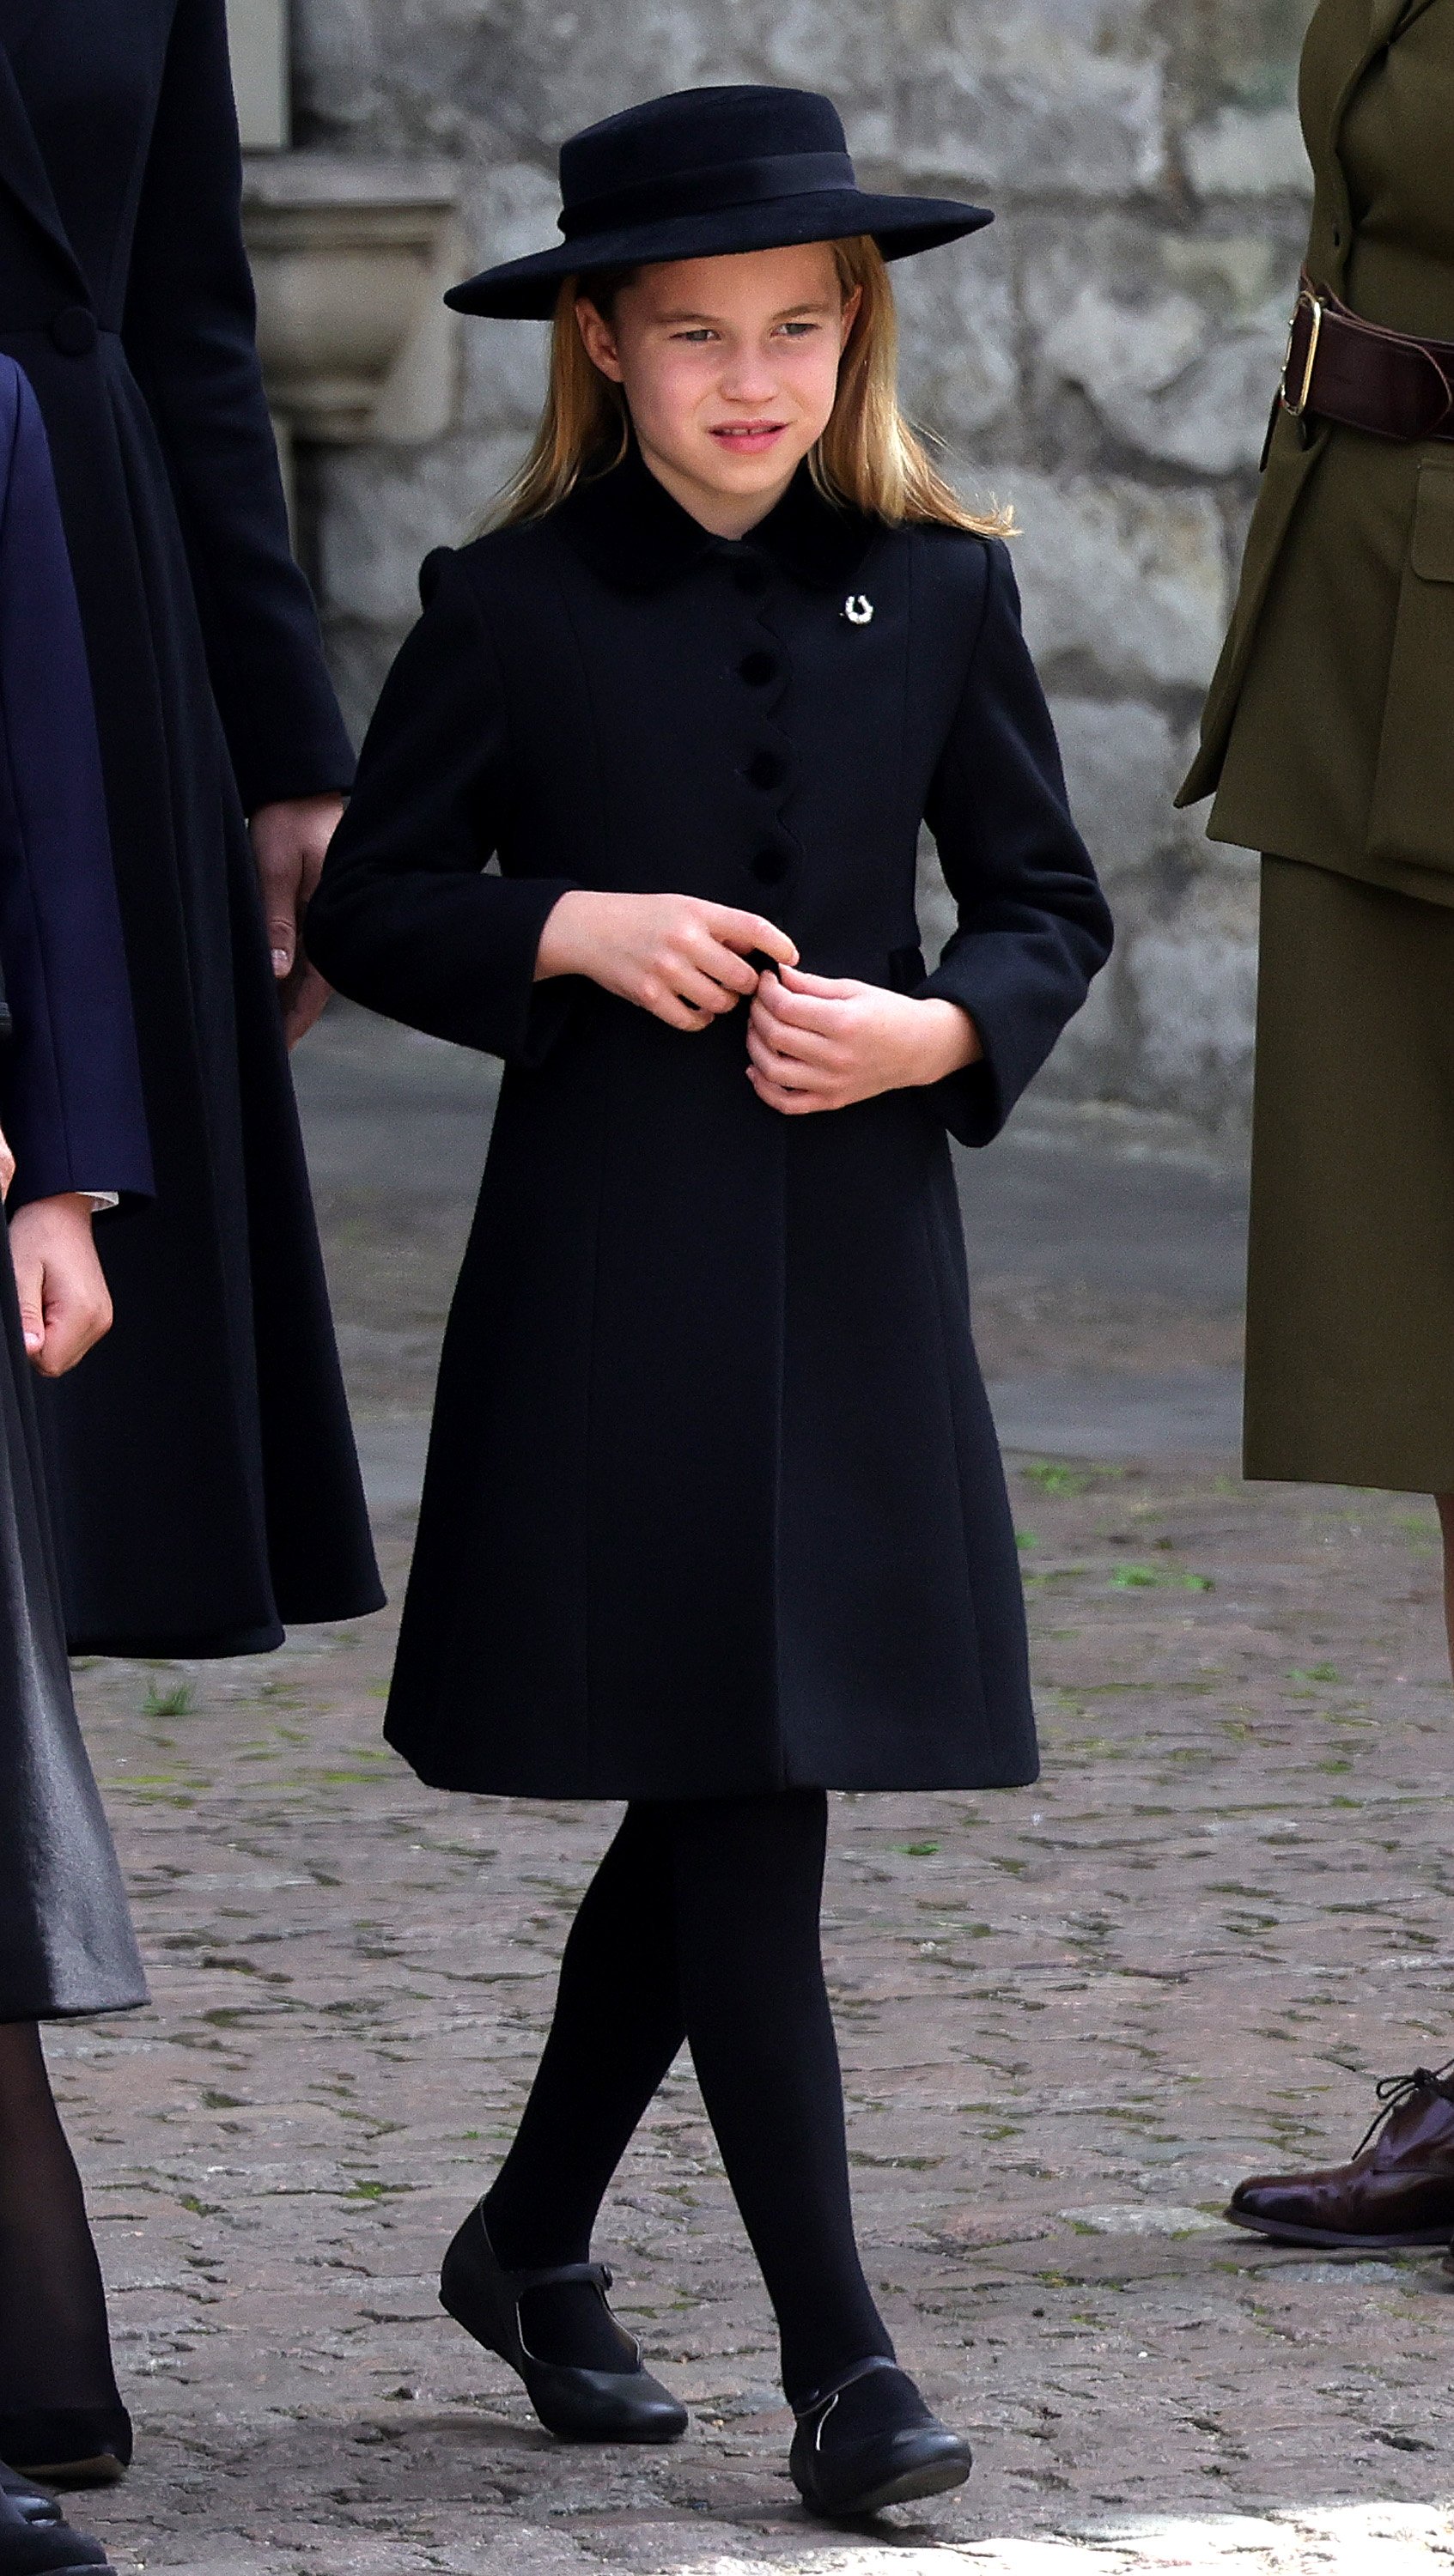 Princess Charlotte is seen during the state funeral of Queen Elizabeth II at Westminster Abbey on September 19, 2022 in London, England | Source: Getty Images